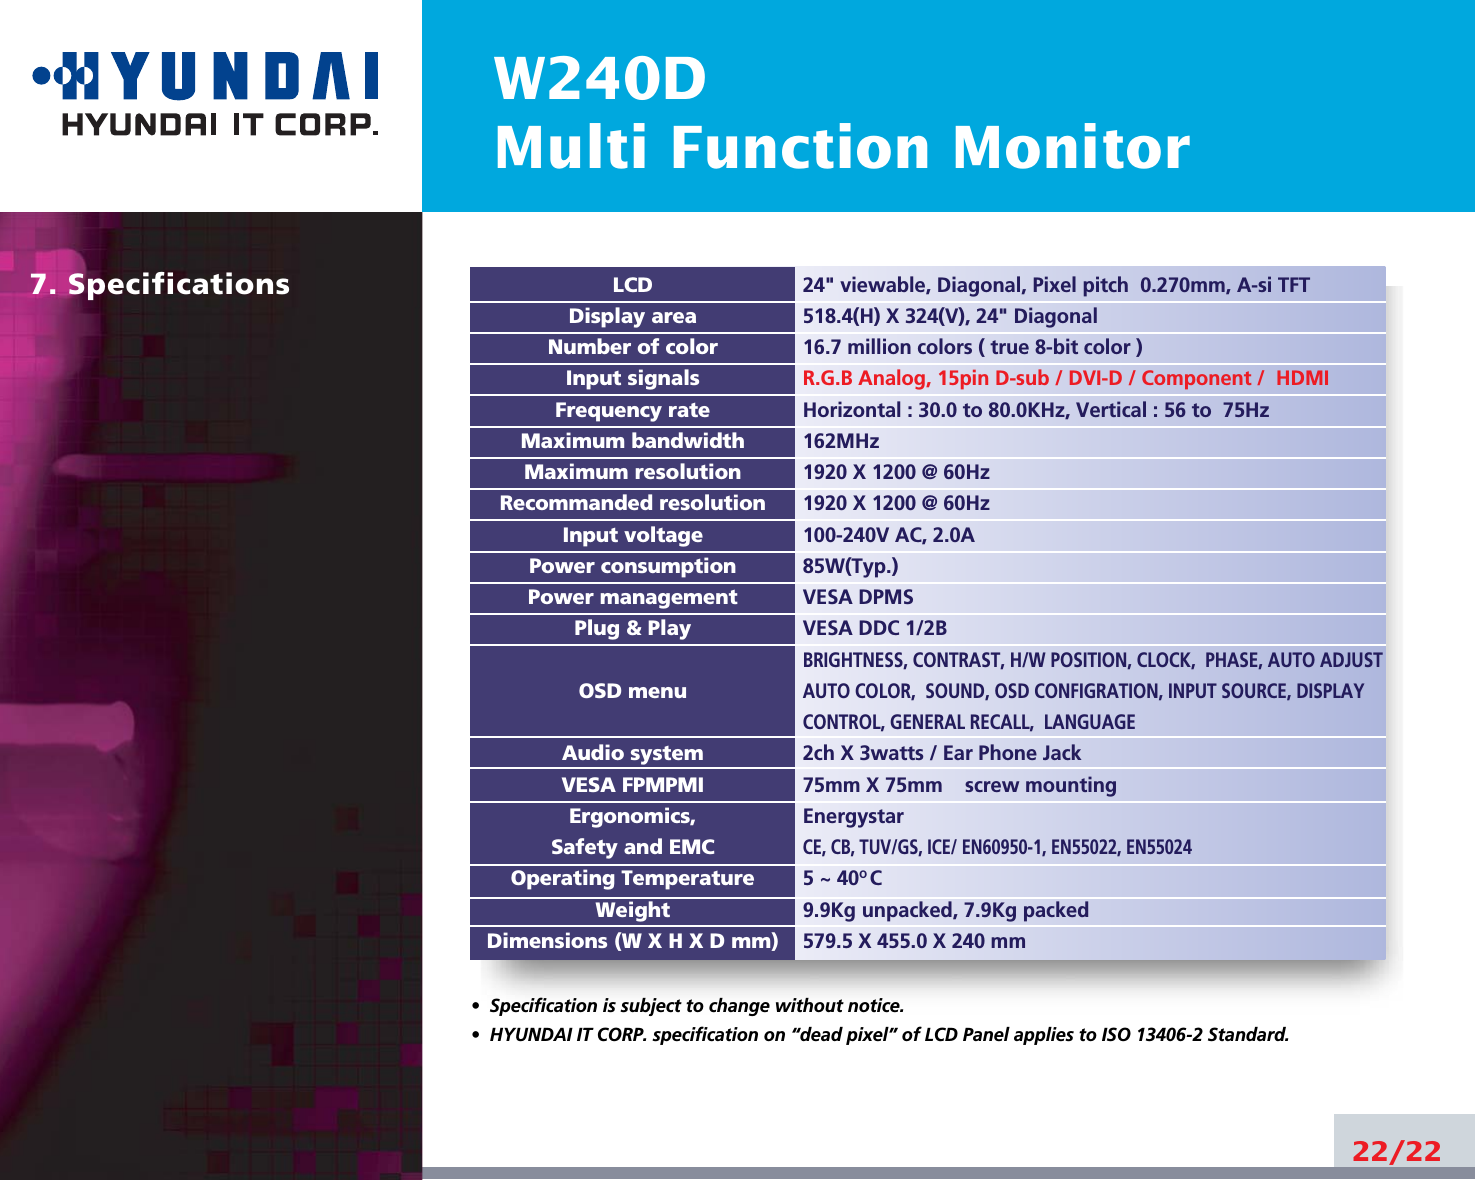 W240DMulti Function Monitor7. Specifications22/22LCDDisplay areaNumber of colorInput signalsFrequency rateMaximum bandwidthMaximum resolutionRecommanded resolutionInput voltagePower consumptionPower managementPlug &amp; PlayOSD menuAudio systemVESA FPMPMIErgonomics,Safety and EMCOperating TemperatureWeightDimensions (W X H X D mm)•  Specification is subject to change without notice.•  HYUNDAI IT CORP. specification on “dead pixel” of LCD Panel applies to ISO 13406-2 Standard.24&quot; viewable, Diagonal, Pixel pitch  0.270mm, A-si TFT518.4(H) X 324(V), 24&quot; Diagonal16.7 million colors ( true 8-bit color )R.G.B Analog, 15pin D-sub / DVI-D / Component /  HDMIHorizontal : 30.0 to 80.0KHz, Vertical : 56 to  75Hz162MHz1920 X 1200 @ 60Hz1920 X 1200 @ 60Hz100-240V AC, 2.0A85W(Typ.)VESA DPMSVESA DDC 1/2BBRIGHTNESS, CONTRAST, H/W POSITION, CLOCK,  PHASE, AUTO ADJUSTAUTO COLOR,  SOUND, OSD CONFIGRATION, INPUT SOURCE, DISPLAYCONTROL, GENERAL RECALL,  LANGUAGE2ch X 3watts / Ear Phone Jack75mm X 75mm screw mountingEnergystarCE, CB, TUV/GS, ICE/ EN60950-1, EN55022, EN550245 ~ 40O C9.9Kg unpacked, 7.9Kg packed579.5 X 455.0 X 240 mm